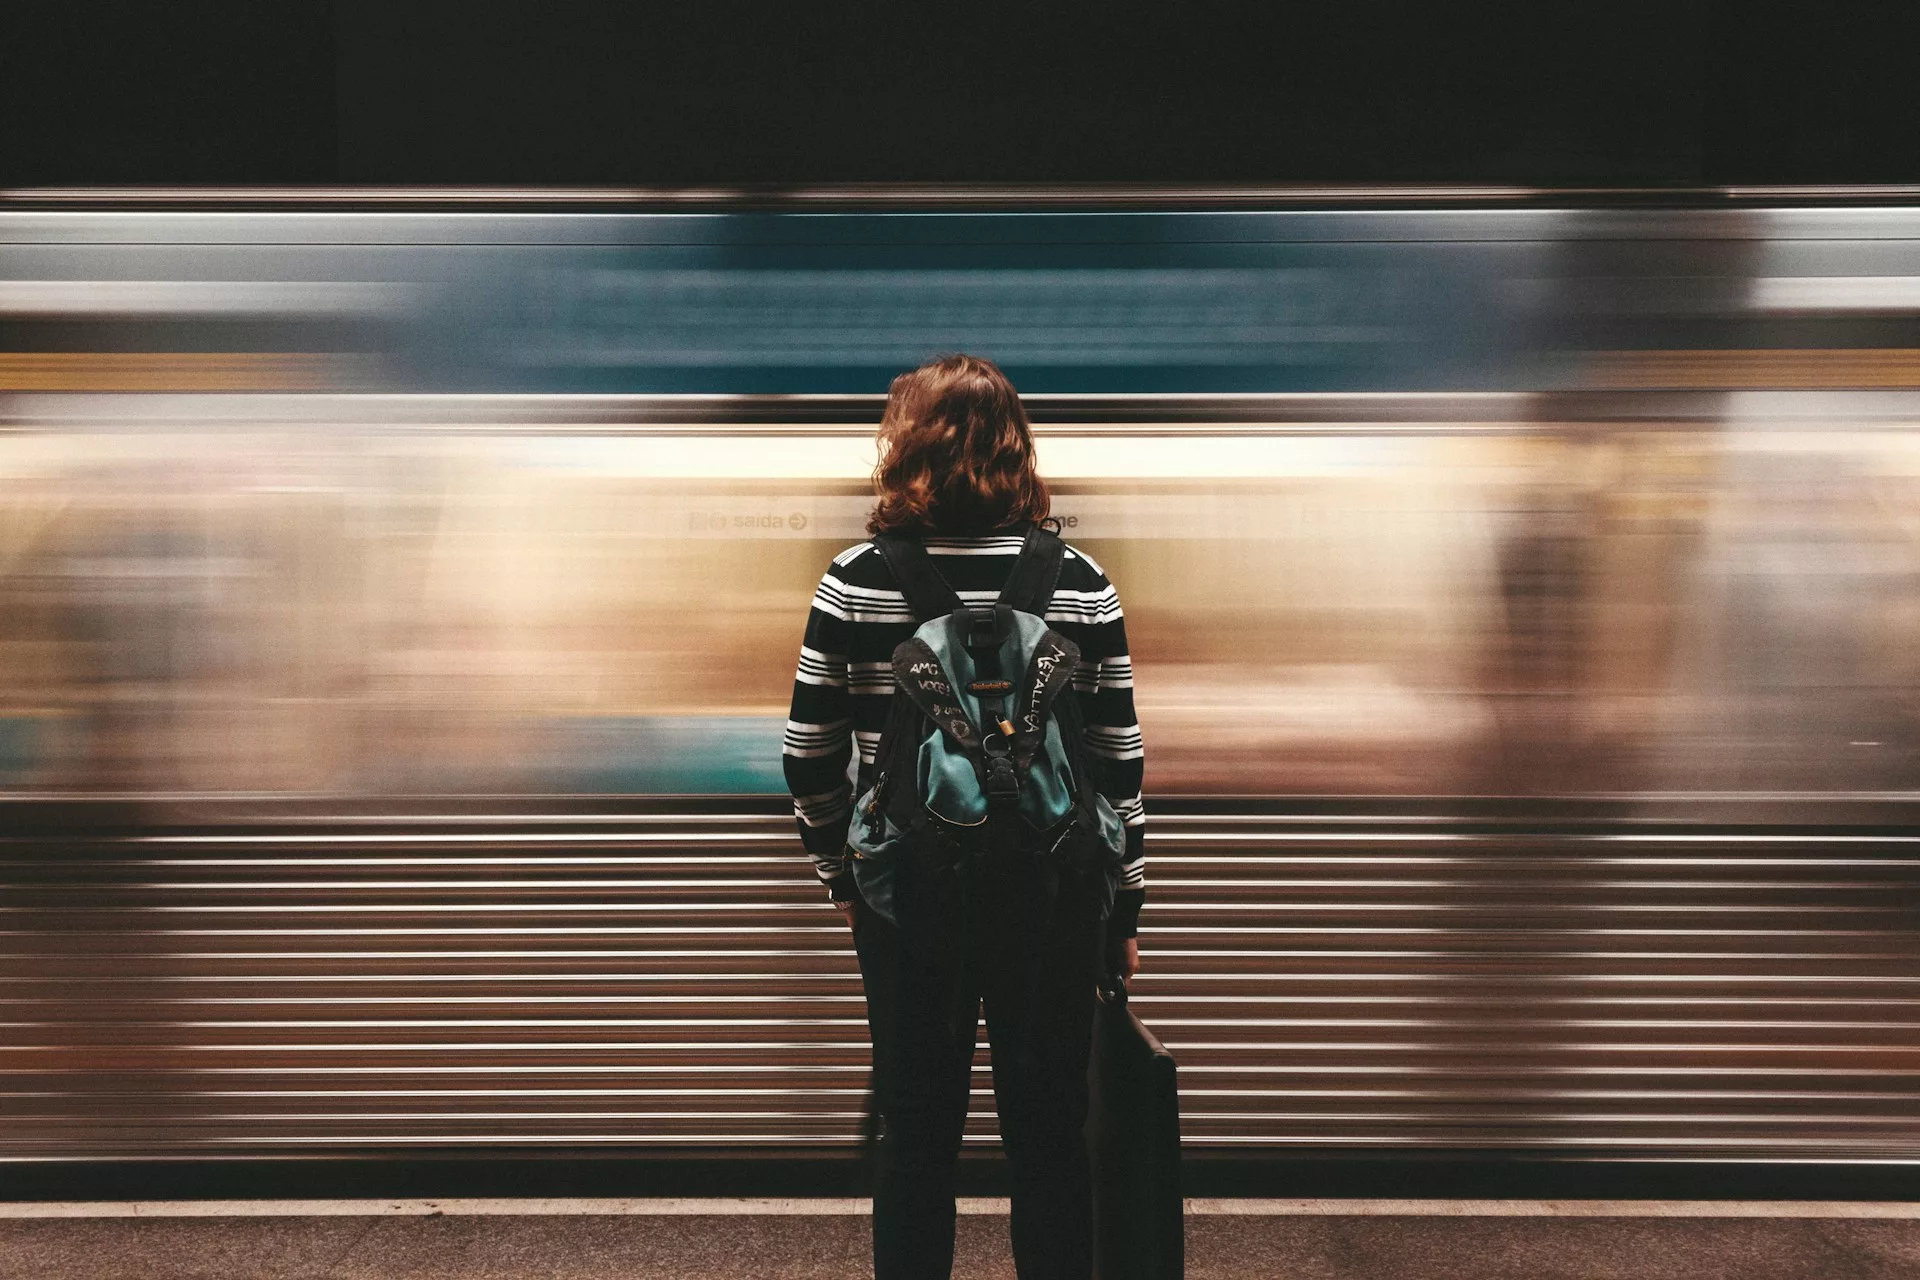 A girl standing in front of a blurry, moving train.